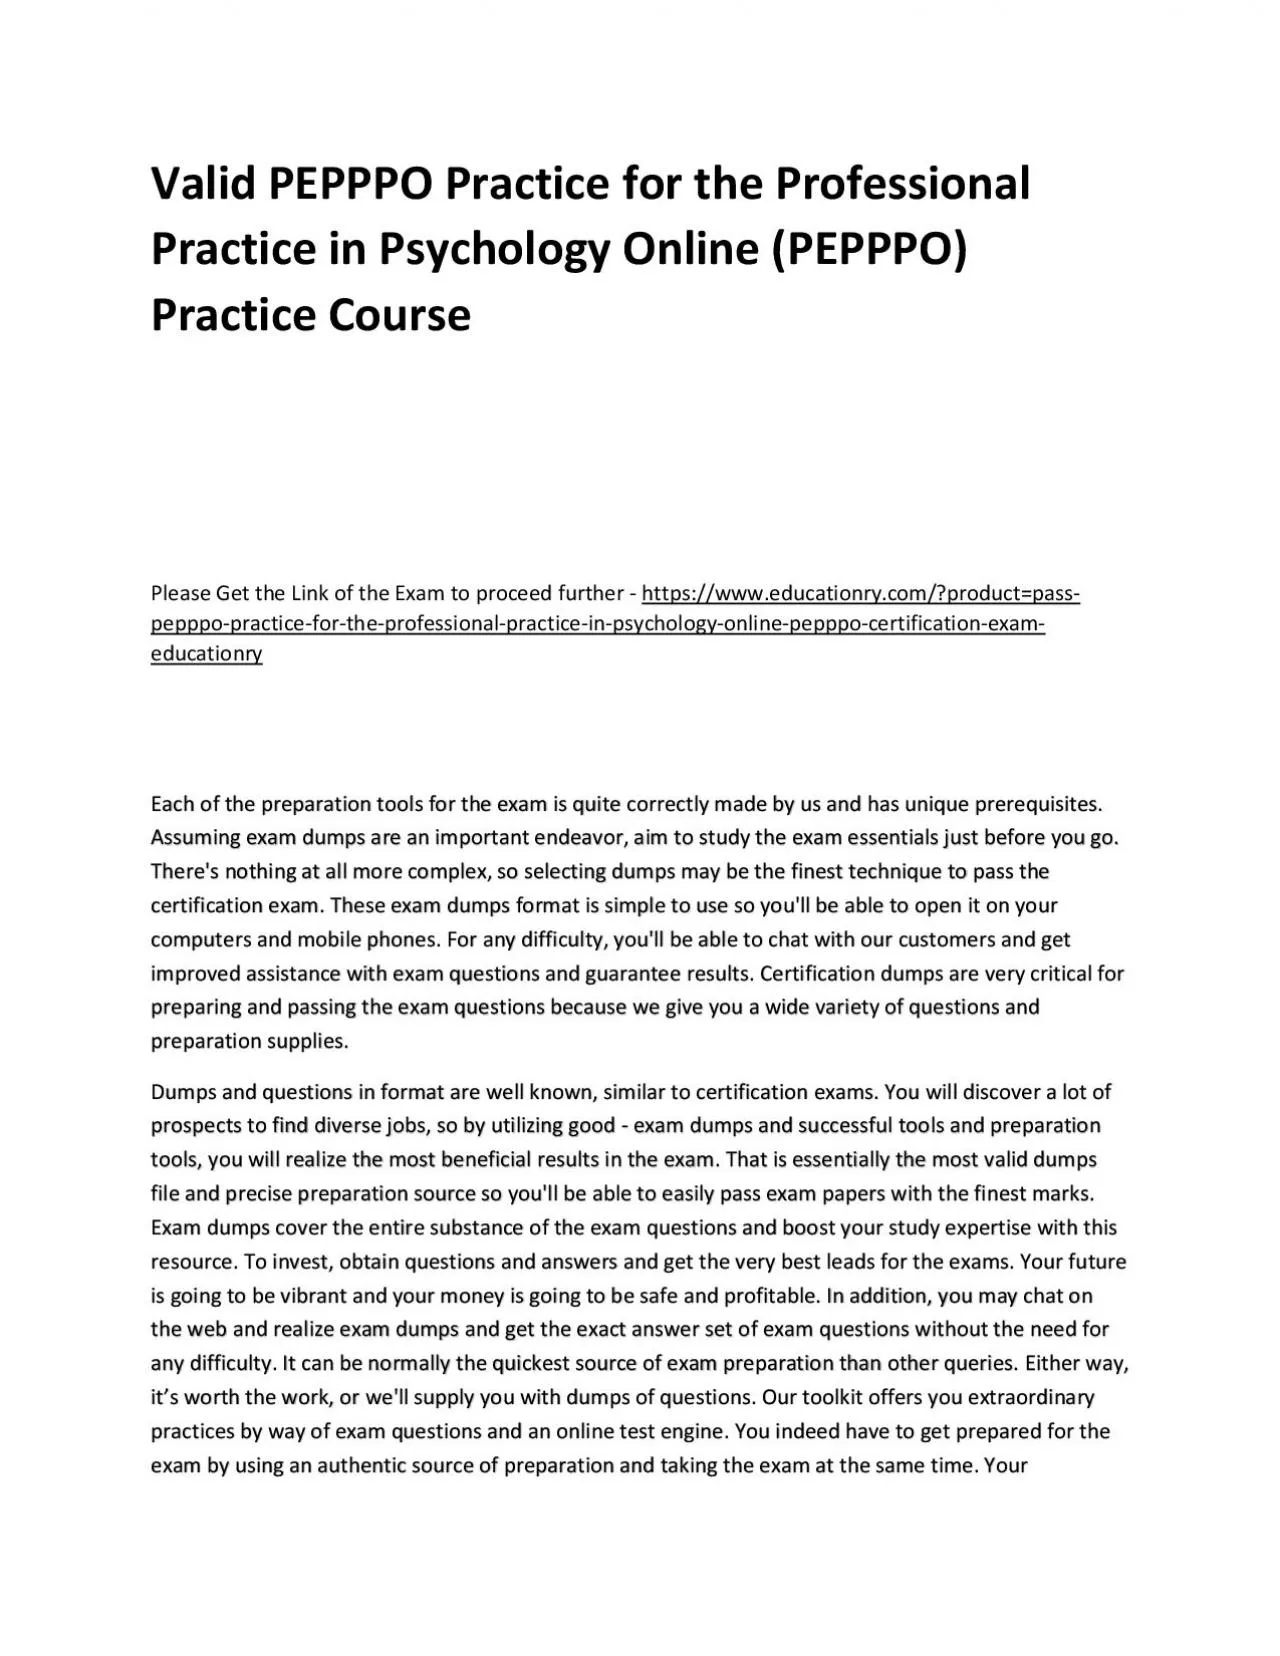 Valid PEPPPO Practice for the Professional Practice in Psychology Online (PEPPPO) Practice